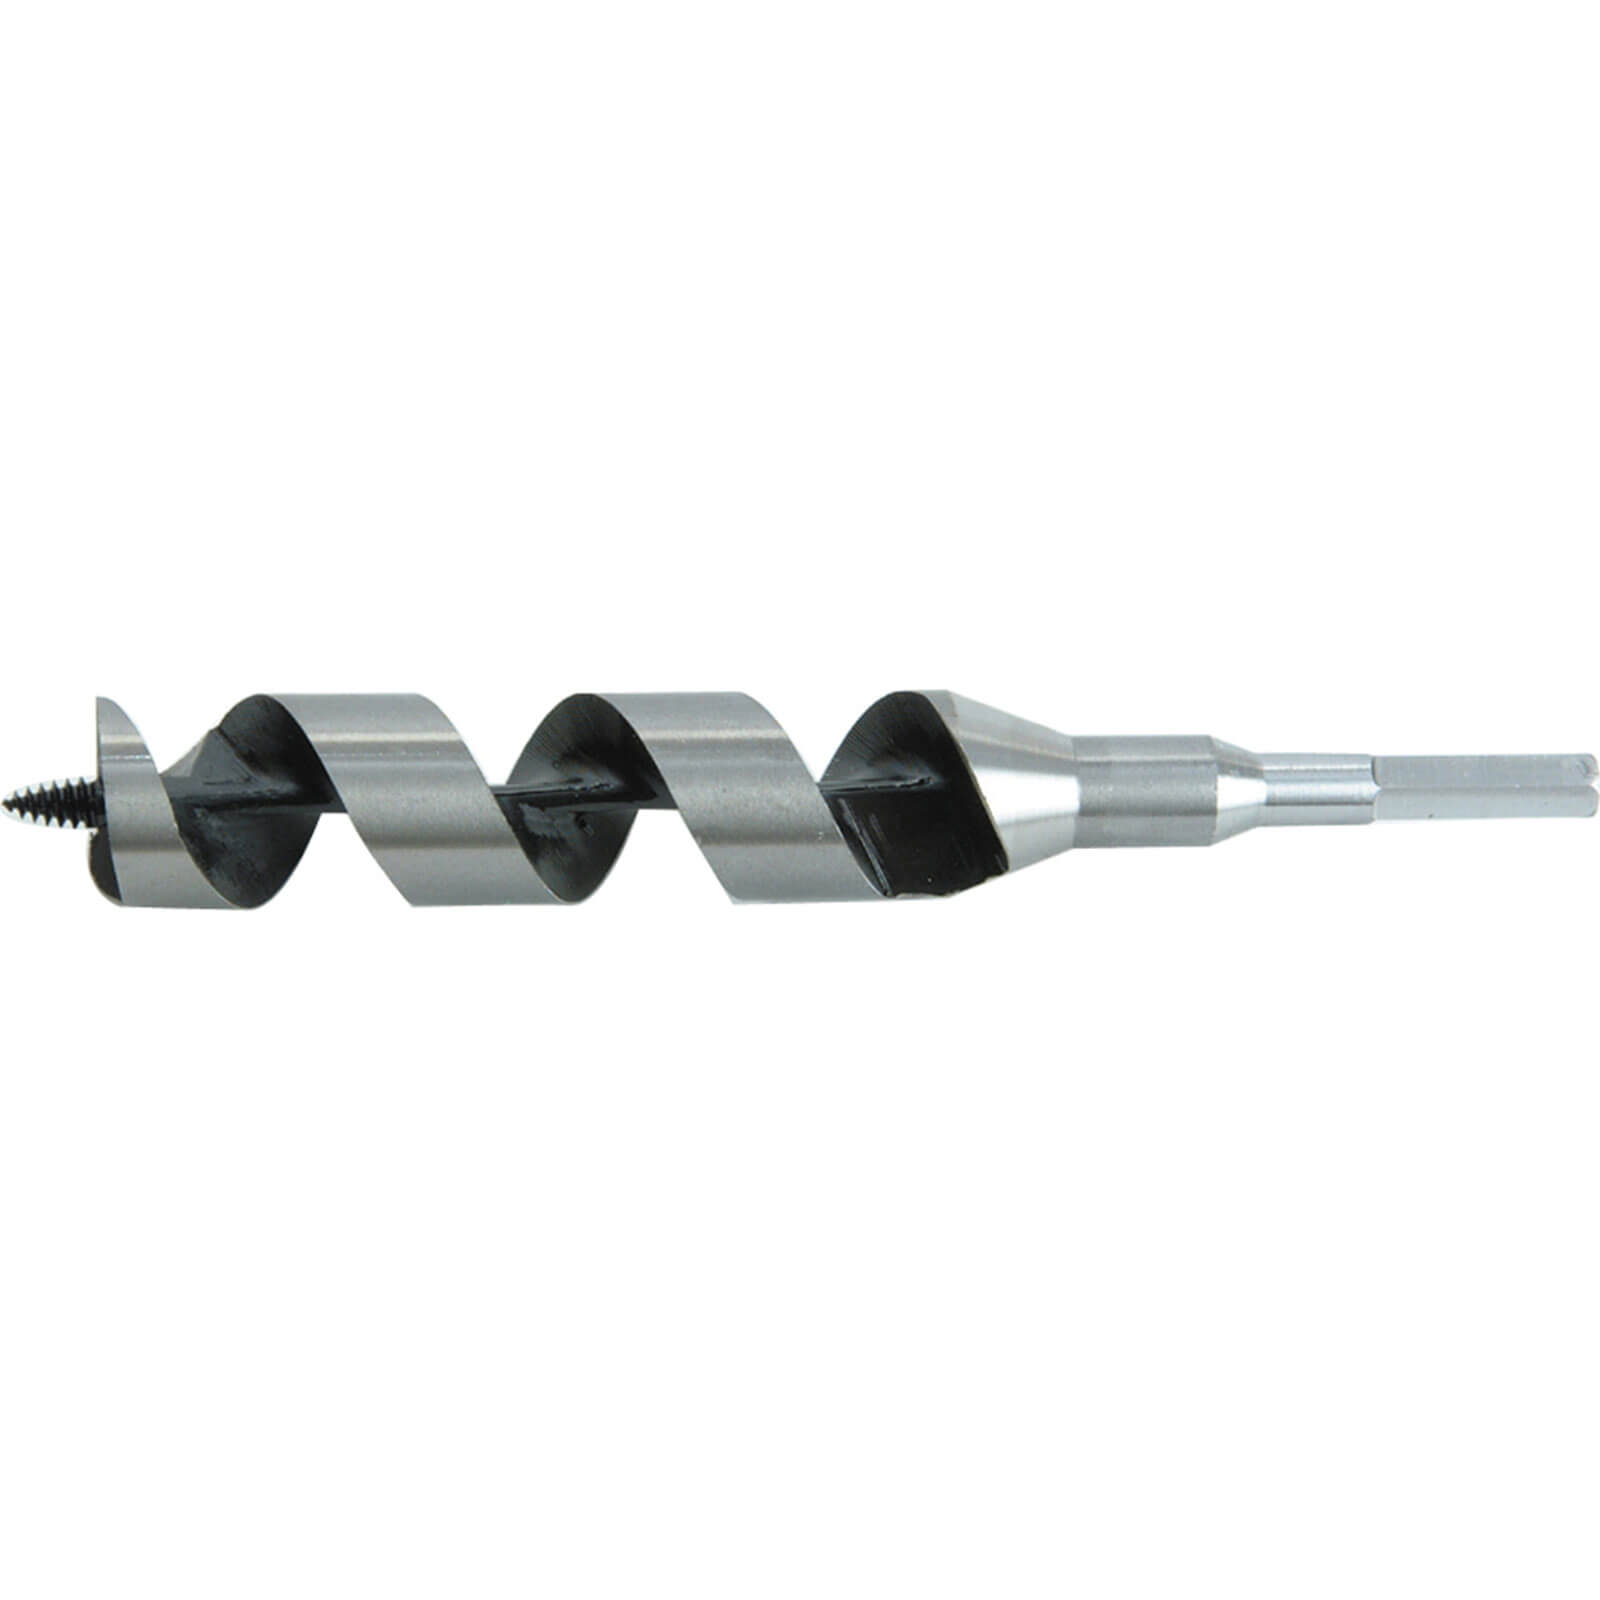 Bahco Combination Auger Drill Bit 20mm